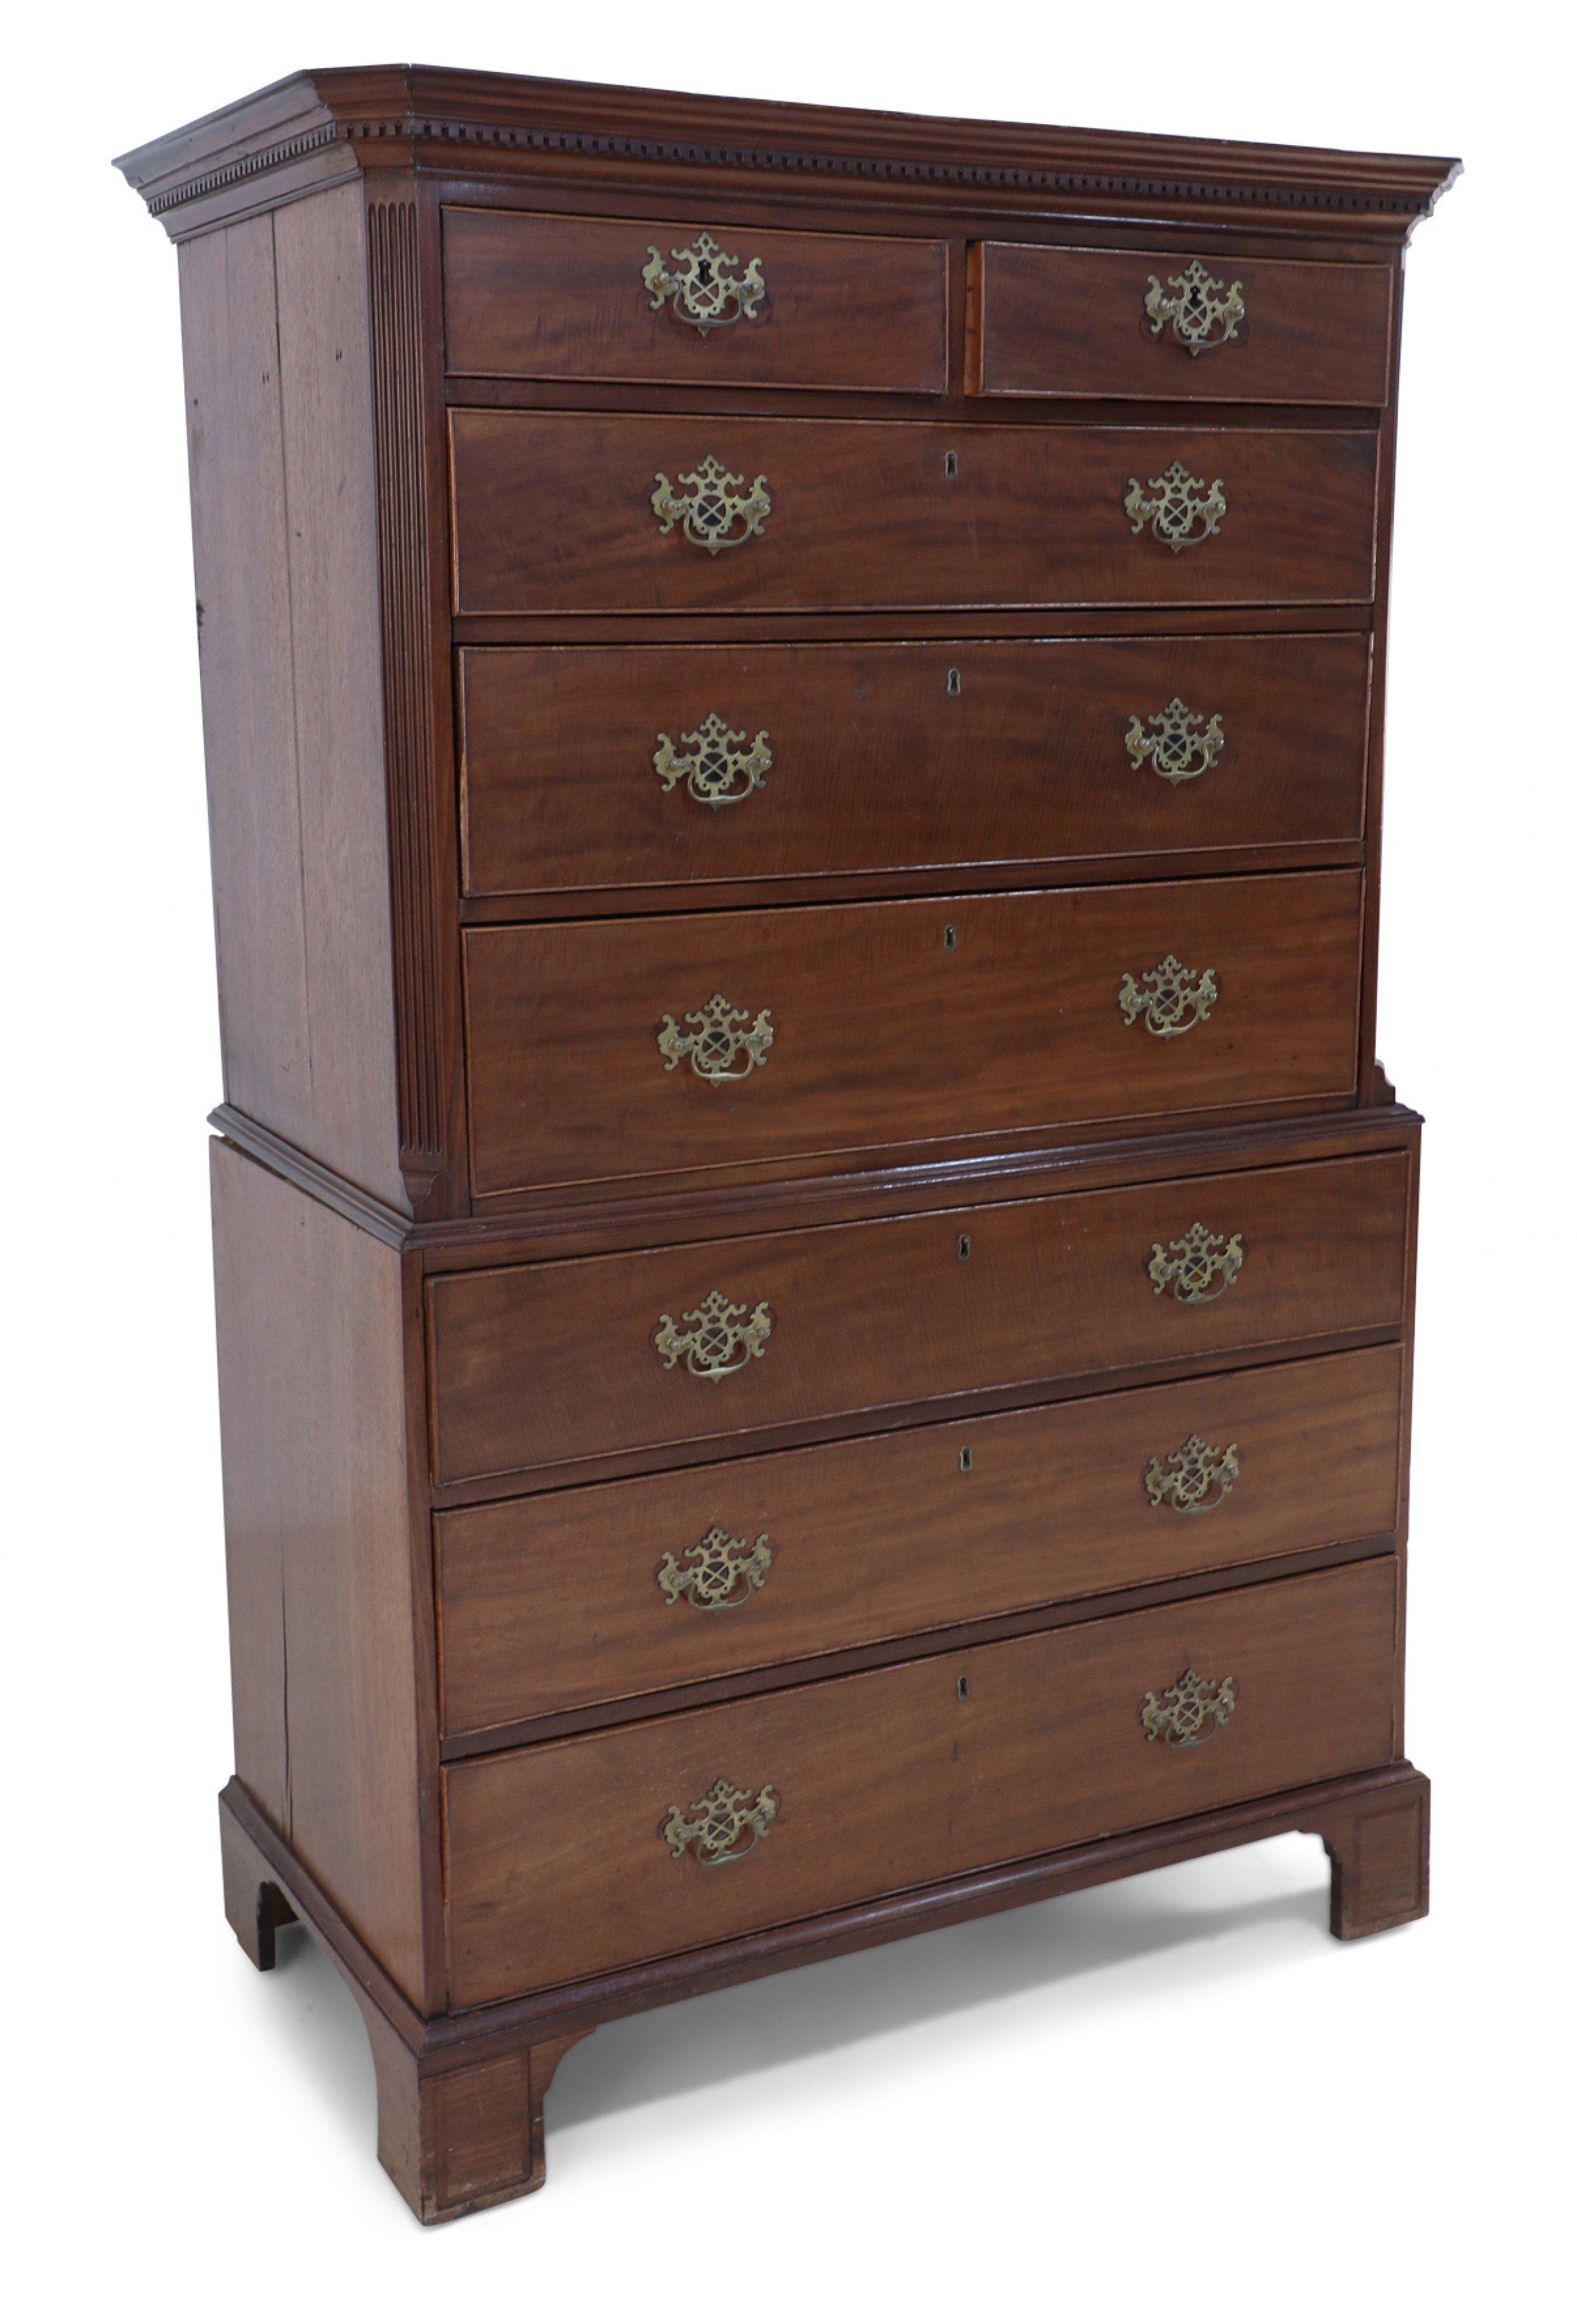 English Georgian (18th Century) mahogany chest on chest with eight drawers (two small, six large) having ornate brass drawer pulls, fluted detail on upper case, and a cornice with dentil carved detail and canted top corners resting on bracket feet.